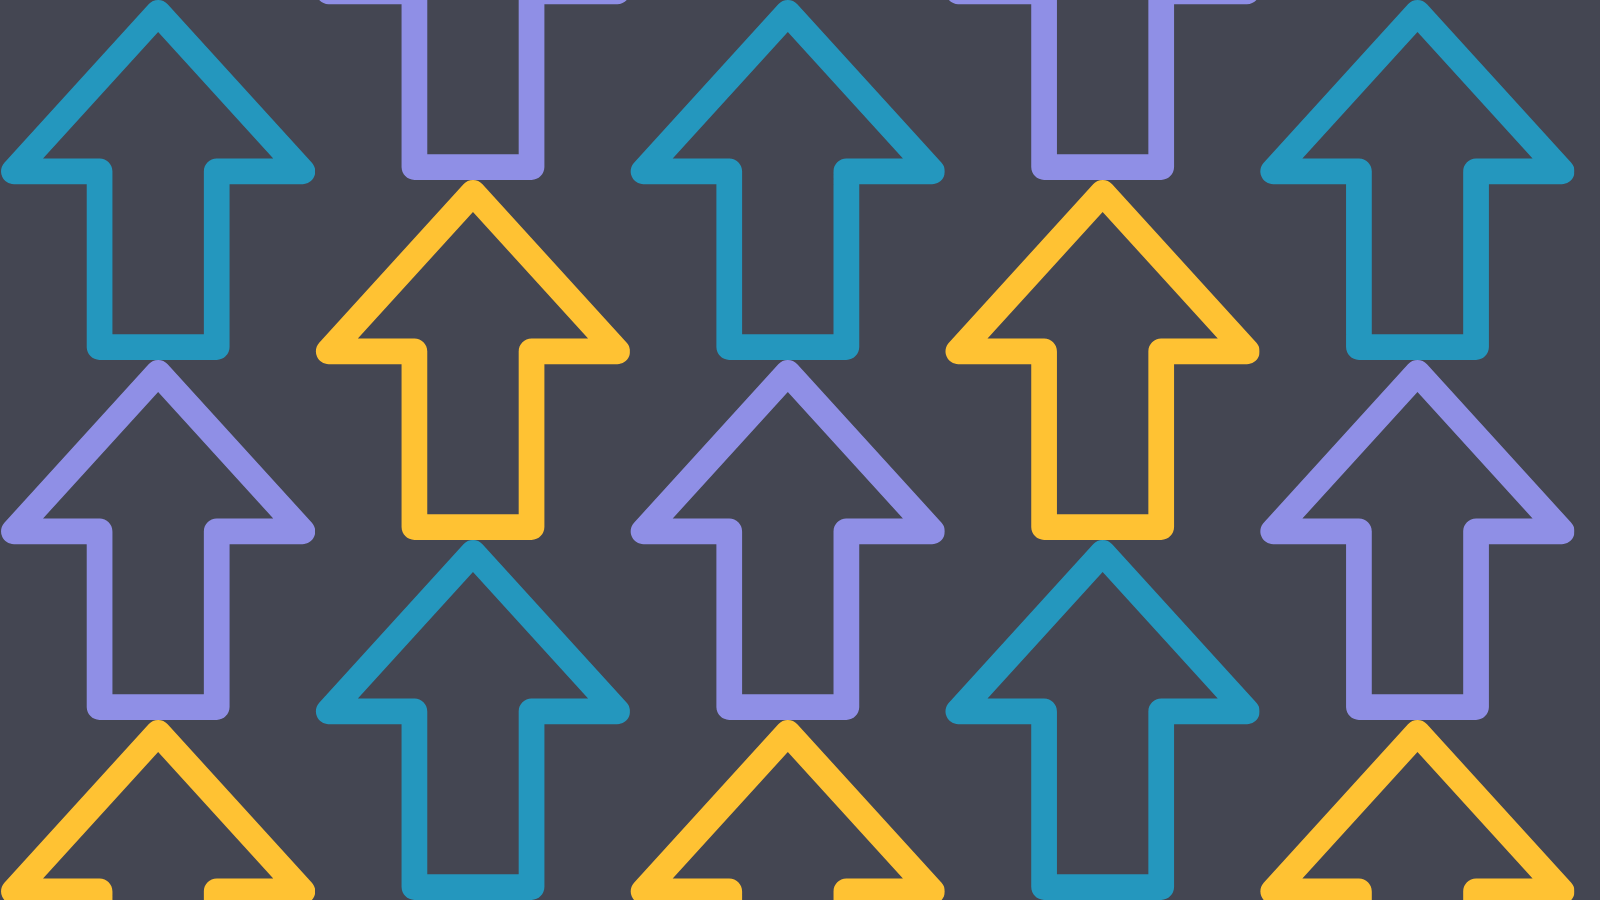 Five columns of arrows pointing up